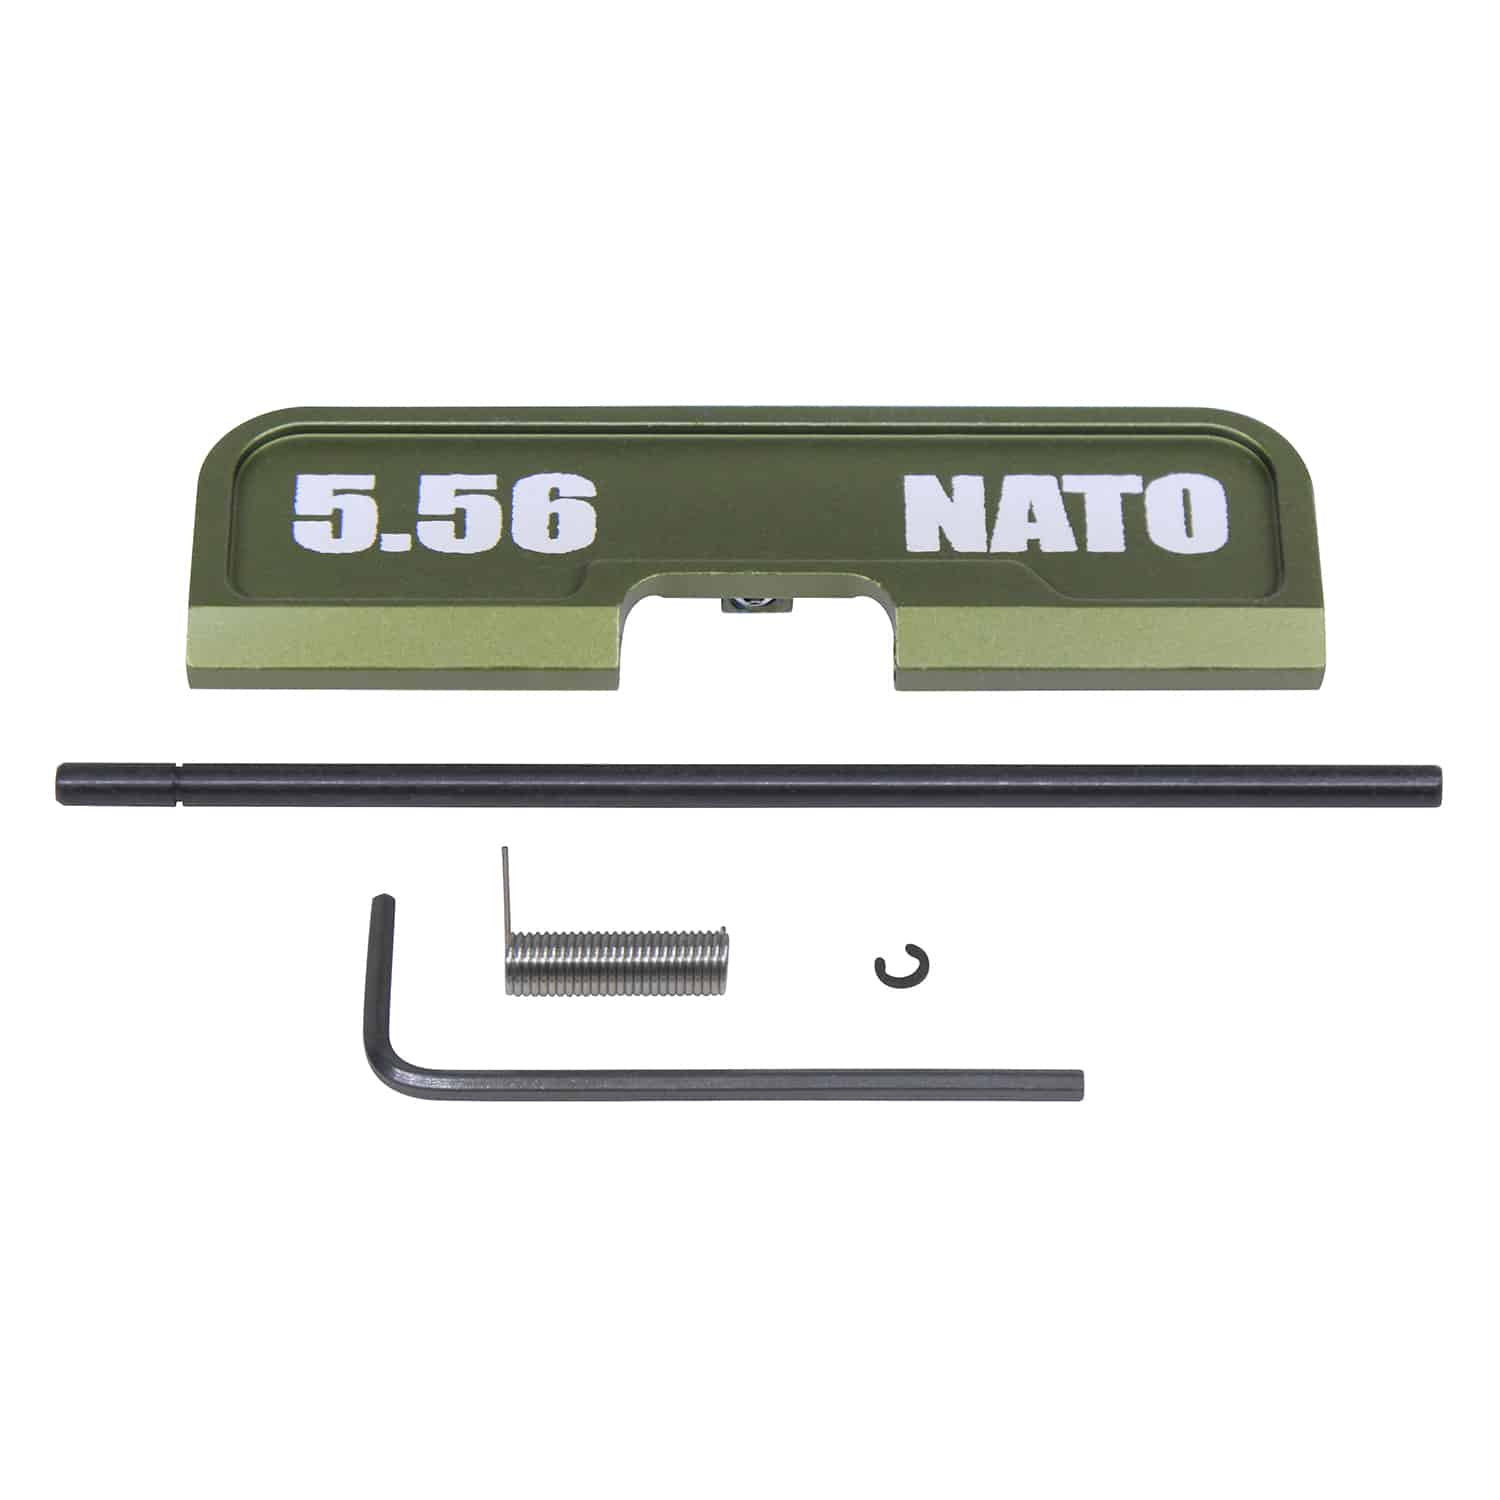 AR-15 Ejection Port Dust Cover Gen 3 '5.56 NATO' Lasered in Anodized Green